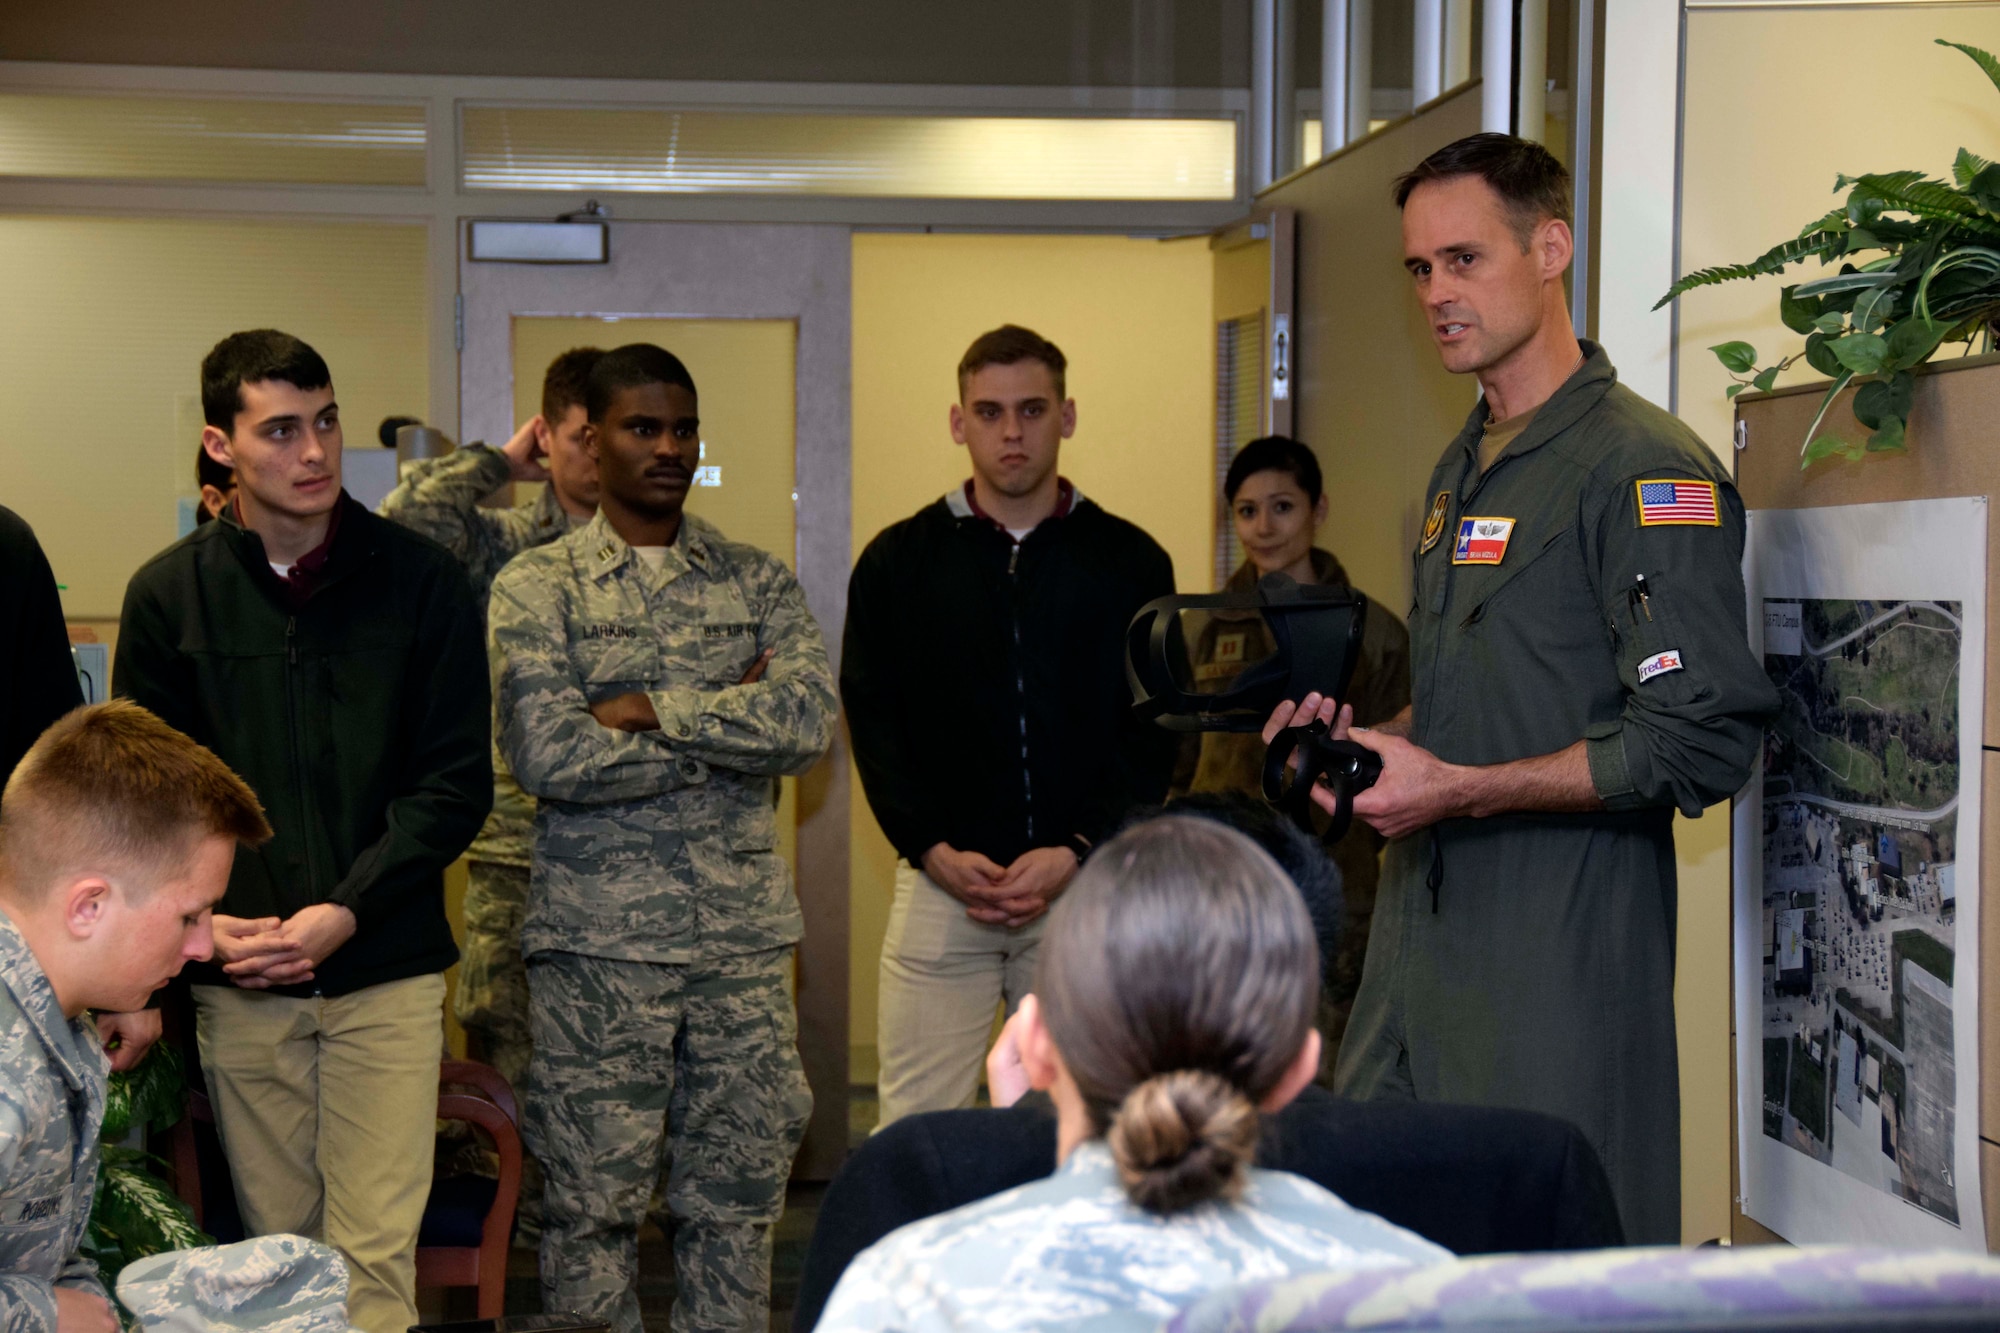 Senior Master Sgt. Brian Mizula, 733rd Training Squadron instructor flight engineer, explains C-5M Super Galaxy aircraft training to members of the Air Force Reserve Officer Training Corps Detachment 840 with Texas State University at Joint Base San Antonio-Lackland, March 3, 2020.